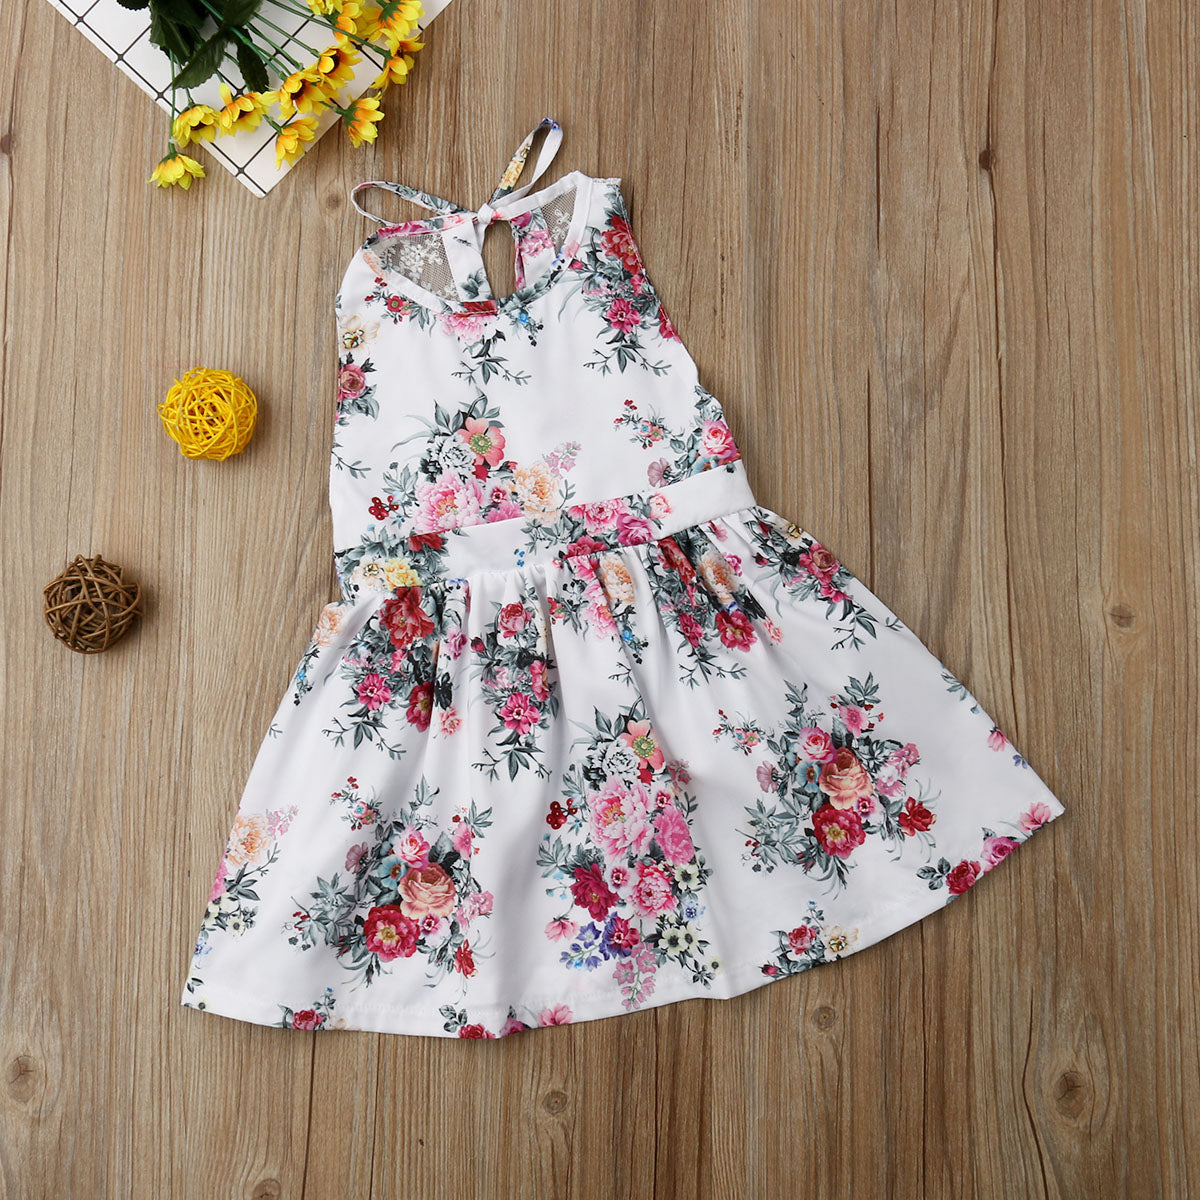 Girl Sleeveless Floral Printed Backless Party Princess Dresses